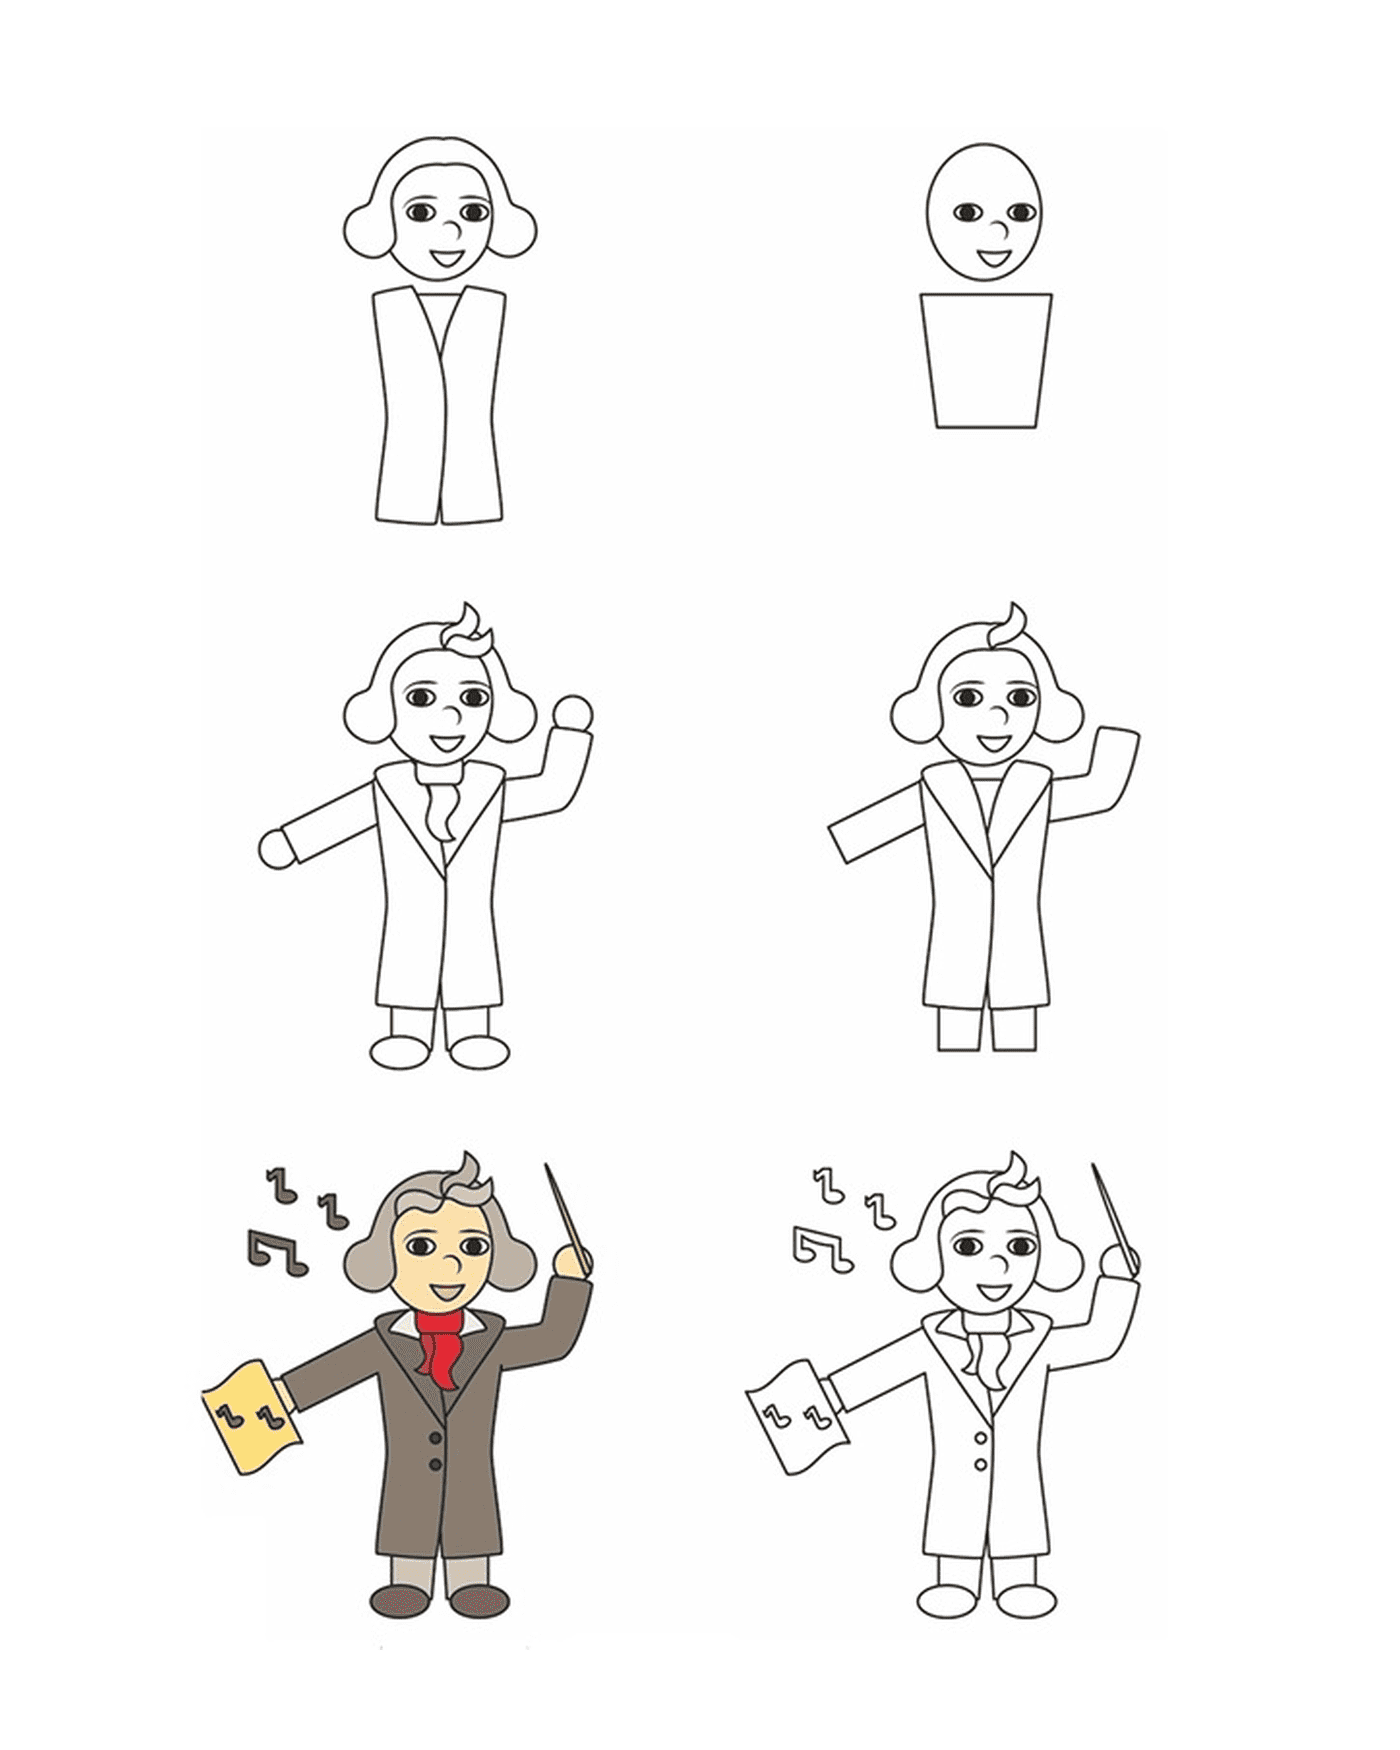  How to draw a man in suit 